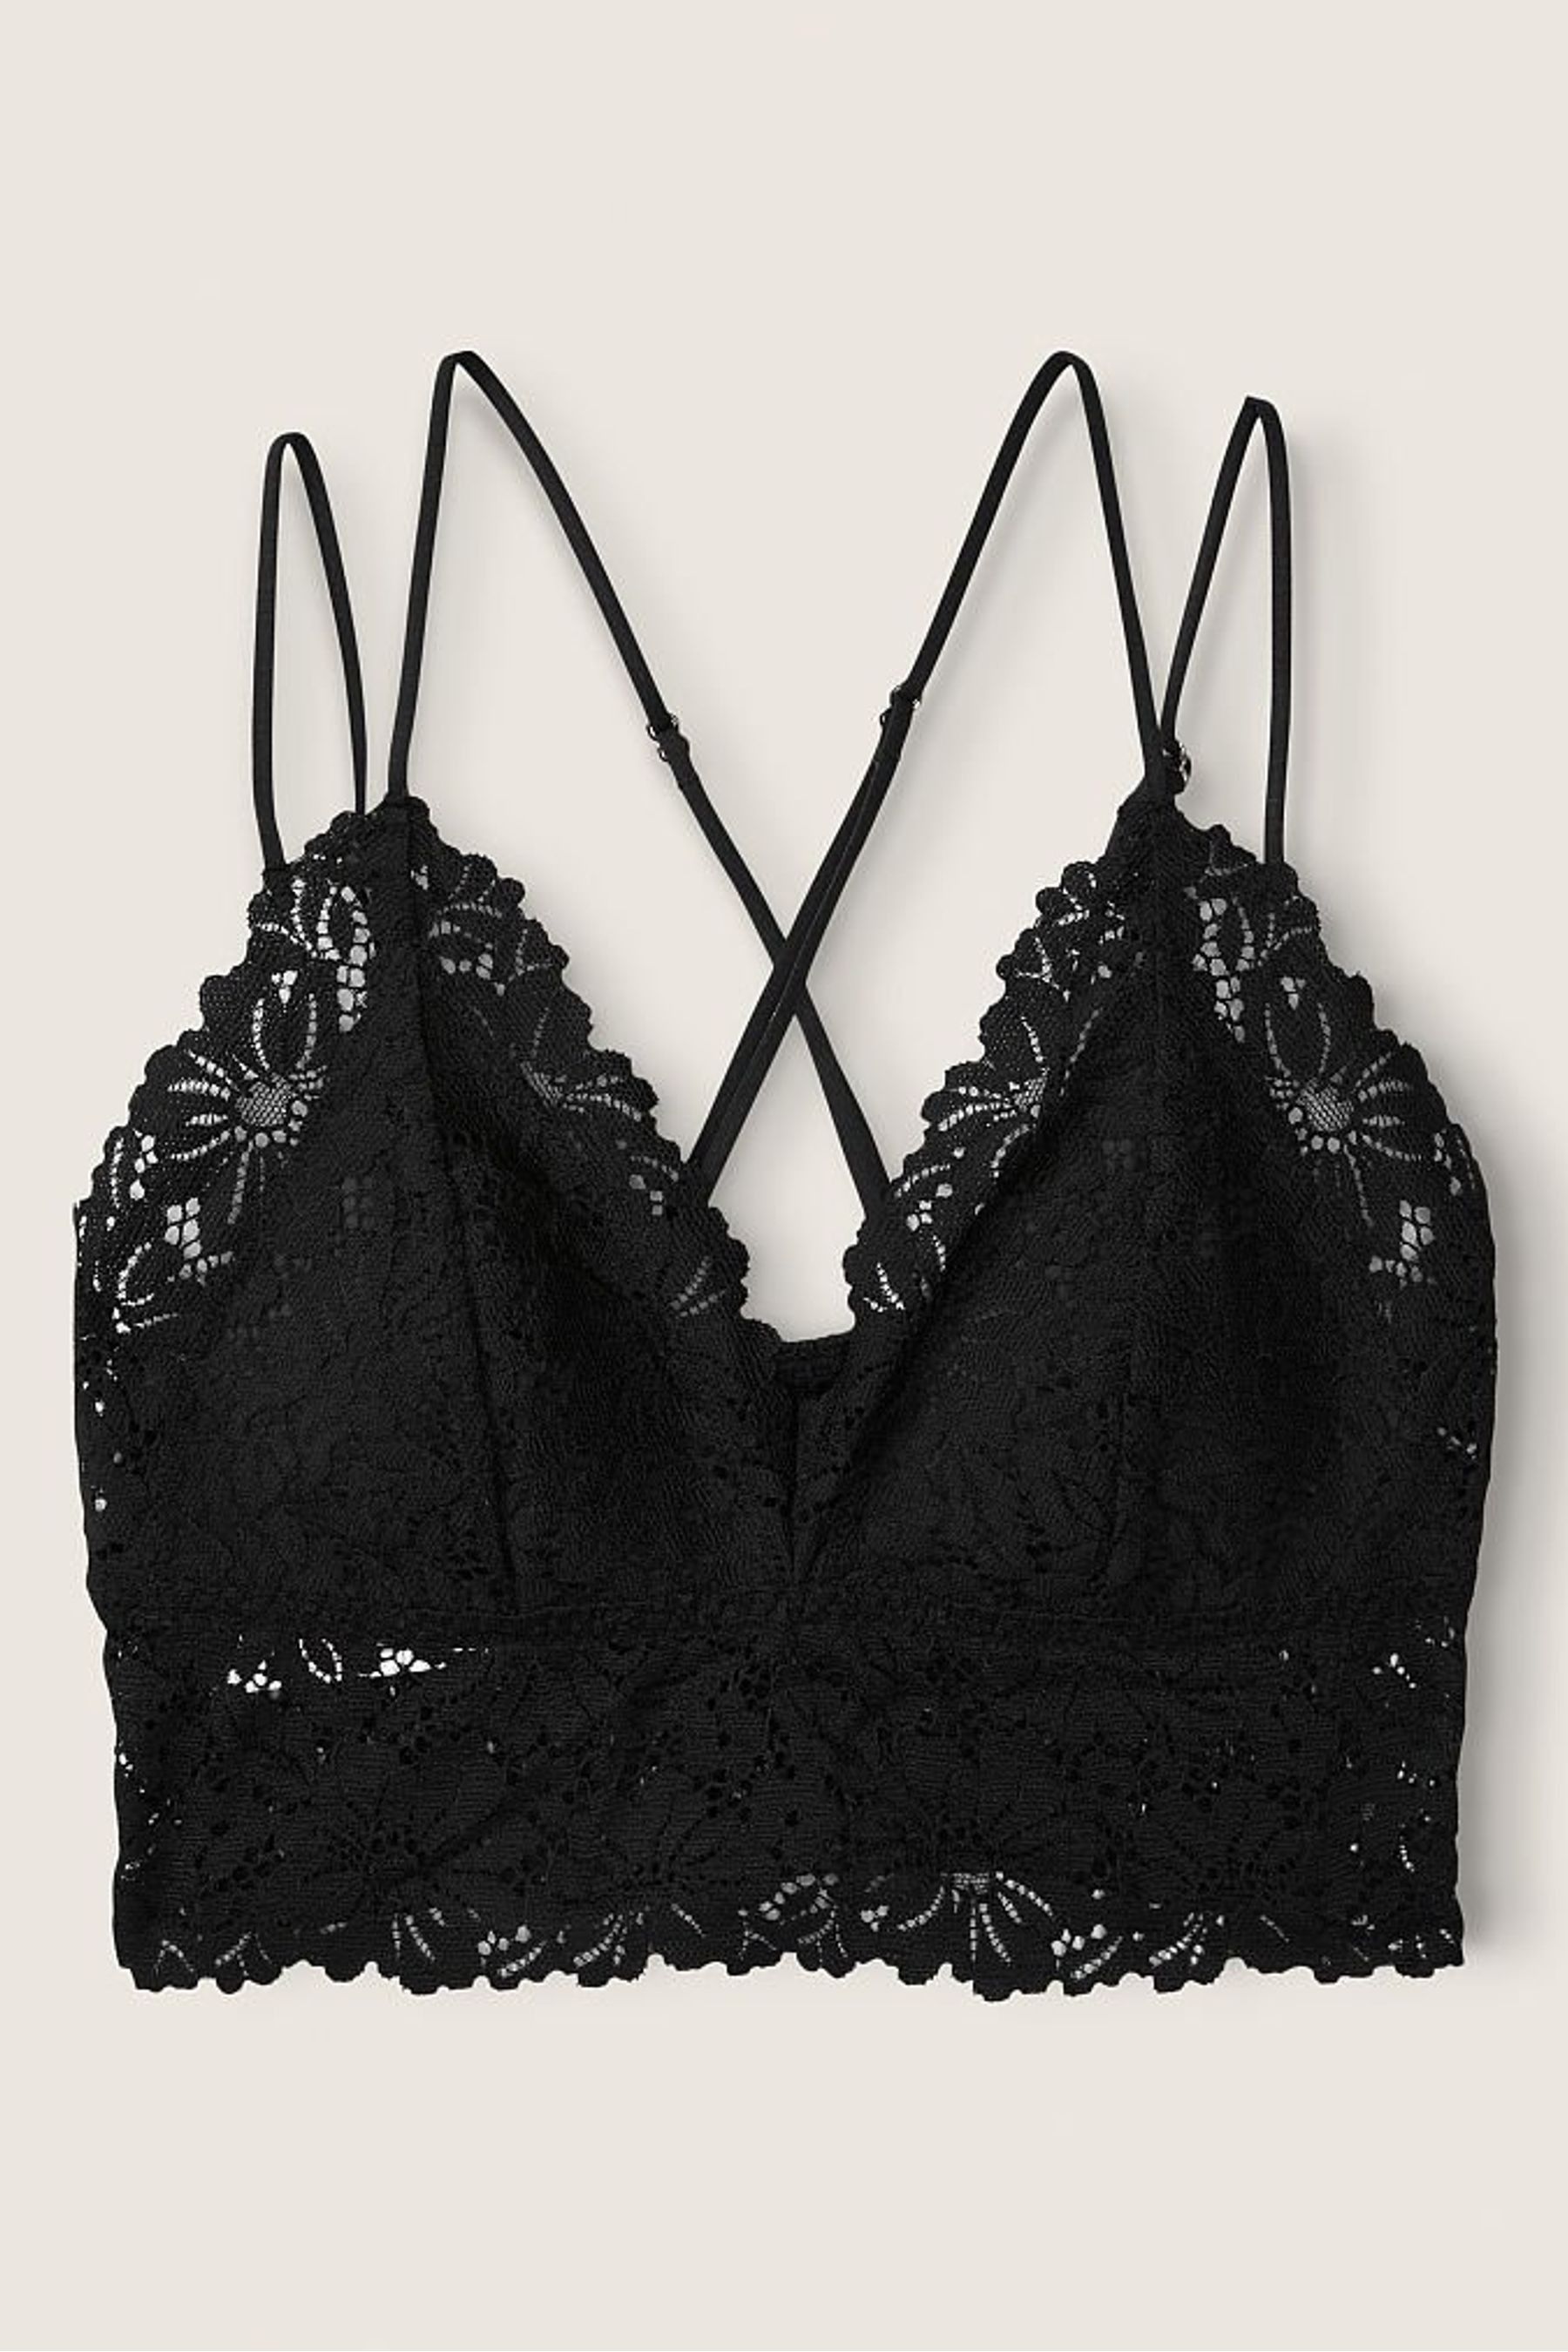 Buy Victoria's Secret PINK Lace Strappy Back Longline Bralette from the ...